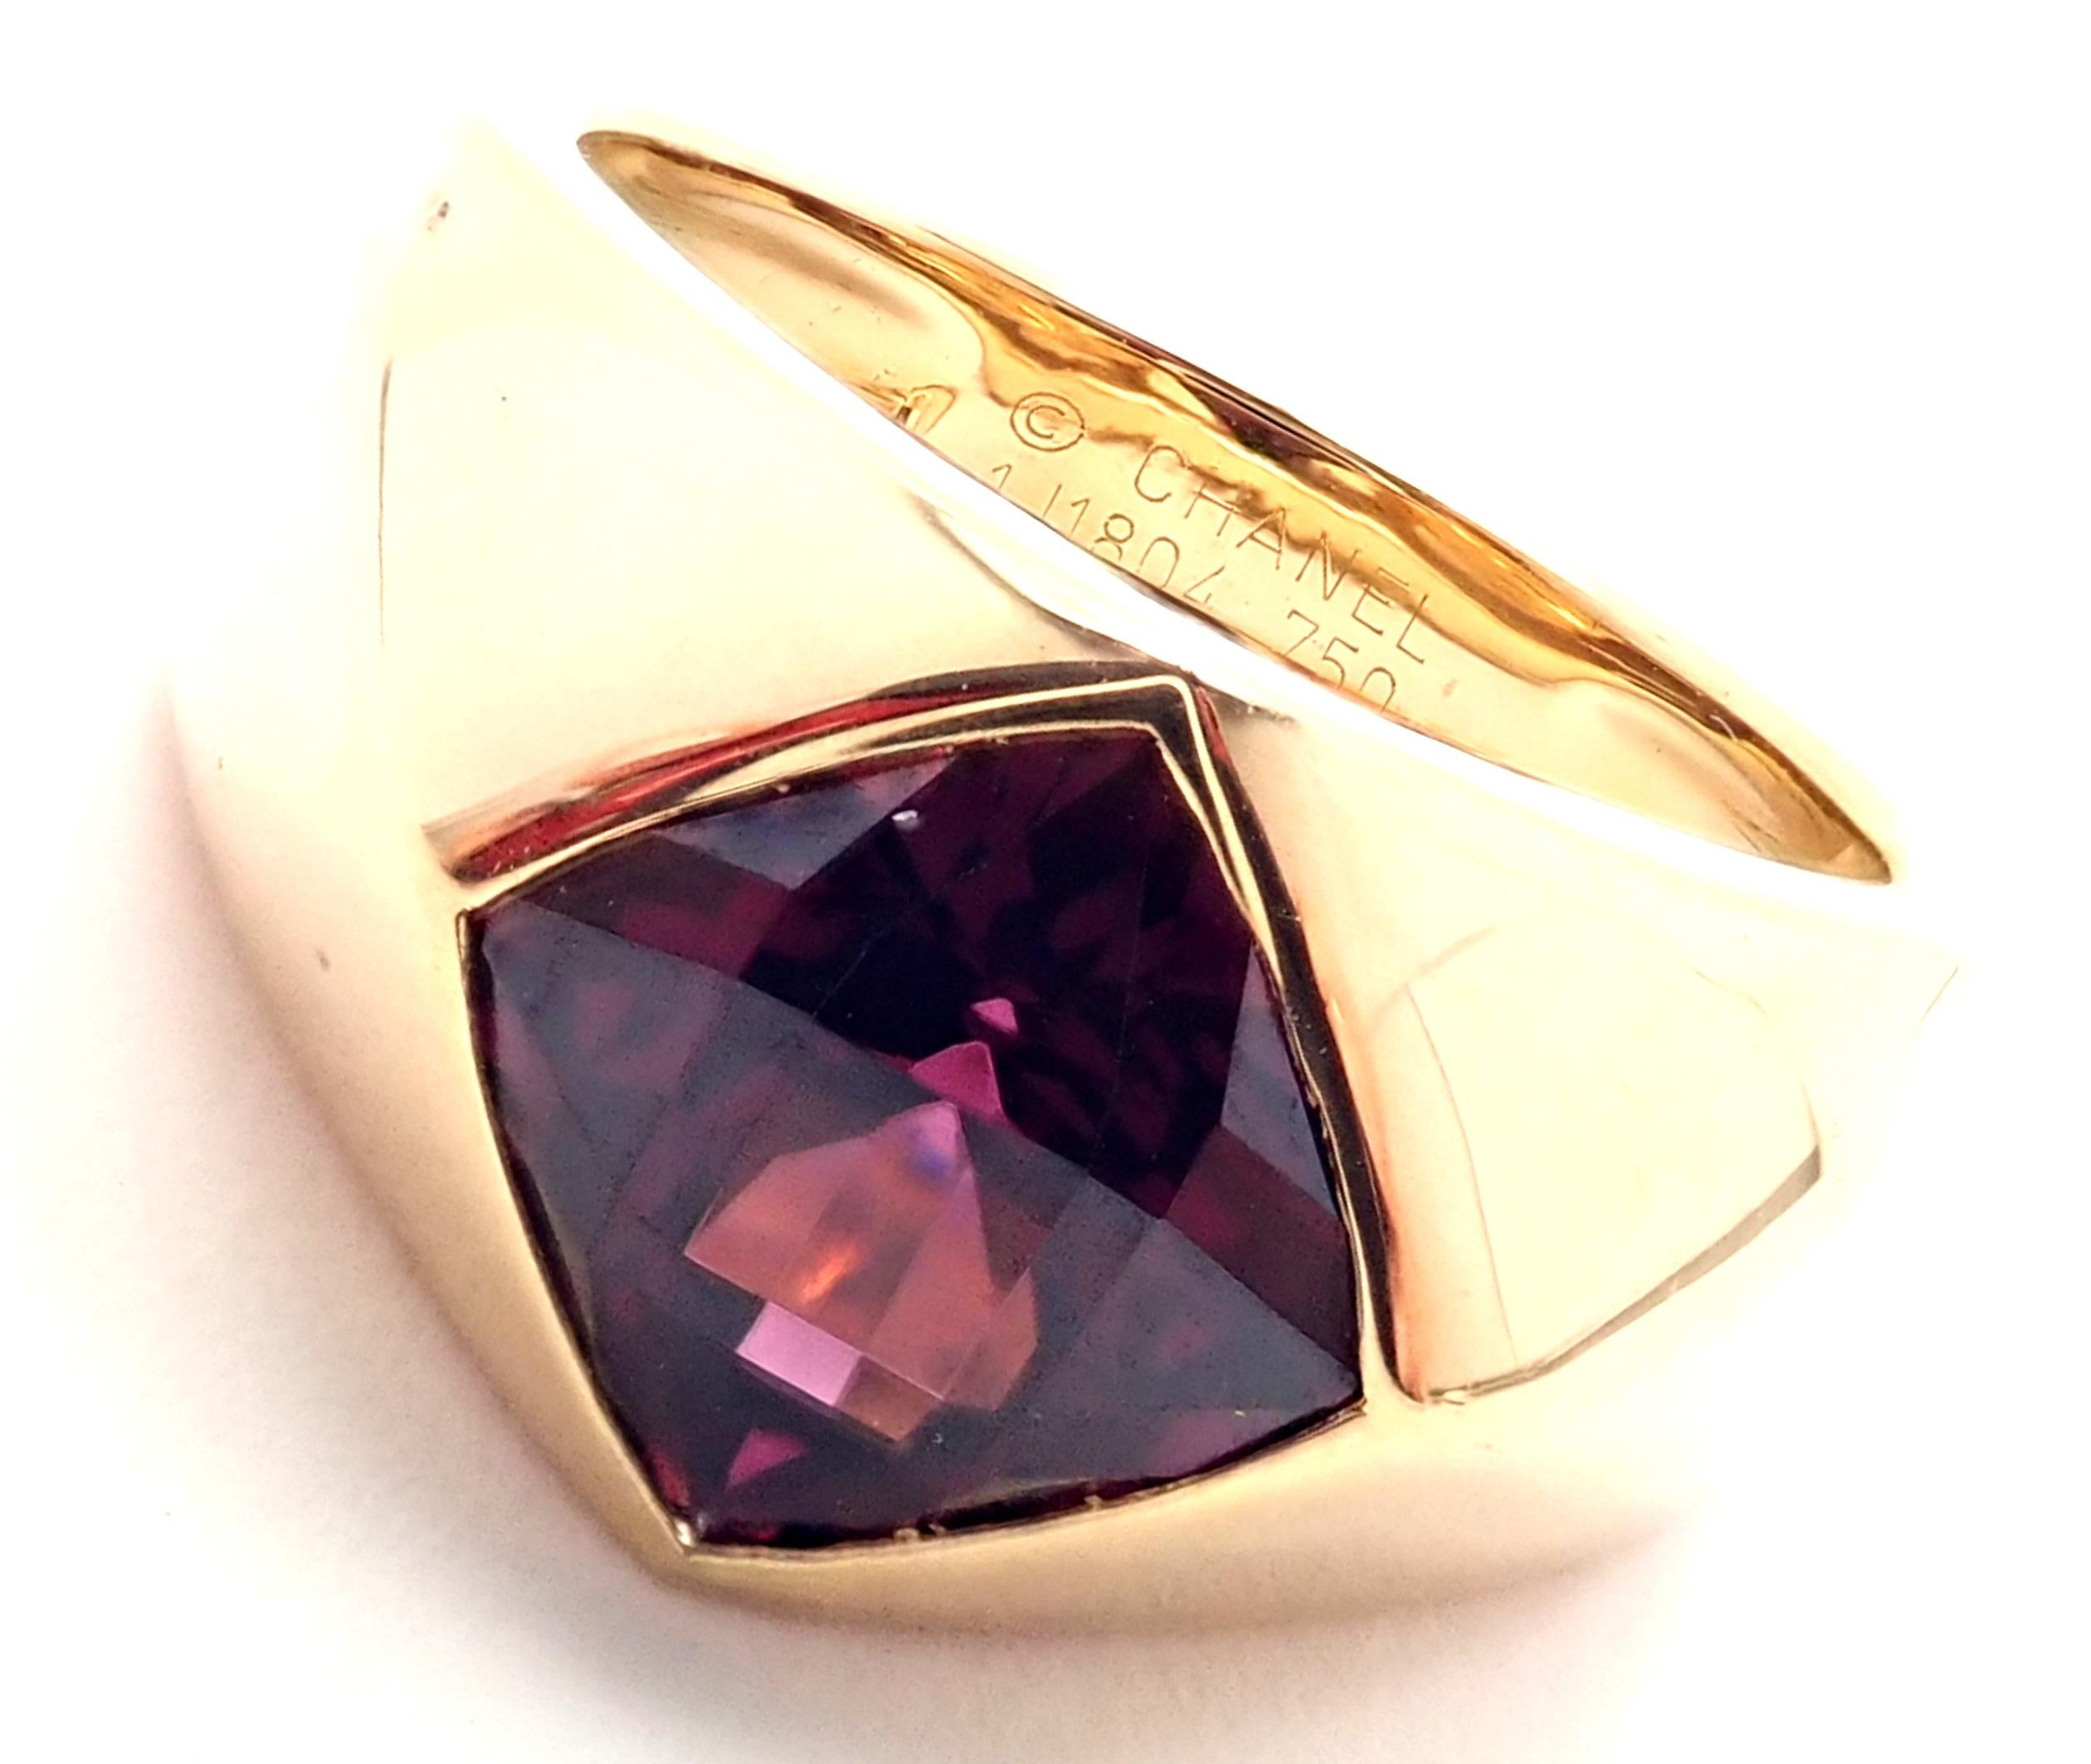 18k Yellow Gold Cushion Cut Amethyst Band Ring by Chanel.
With 1x 3ct Cushion Cut Amethyst 8.5x8.5mm
Measurements: 
Ring Size: 5
Weight: 7.2 grams
Stamped Hallmarks: Chanel 750 1J1804 French Hallmarks
YOUR PRICE: $2,500
*FREE Shipping within the